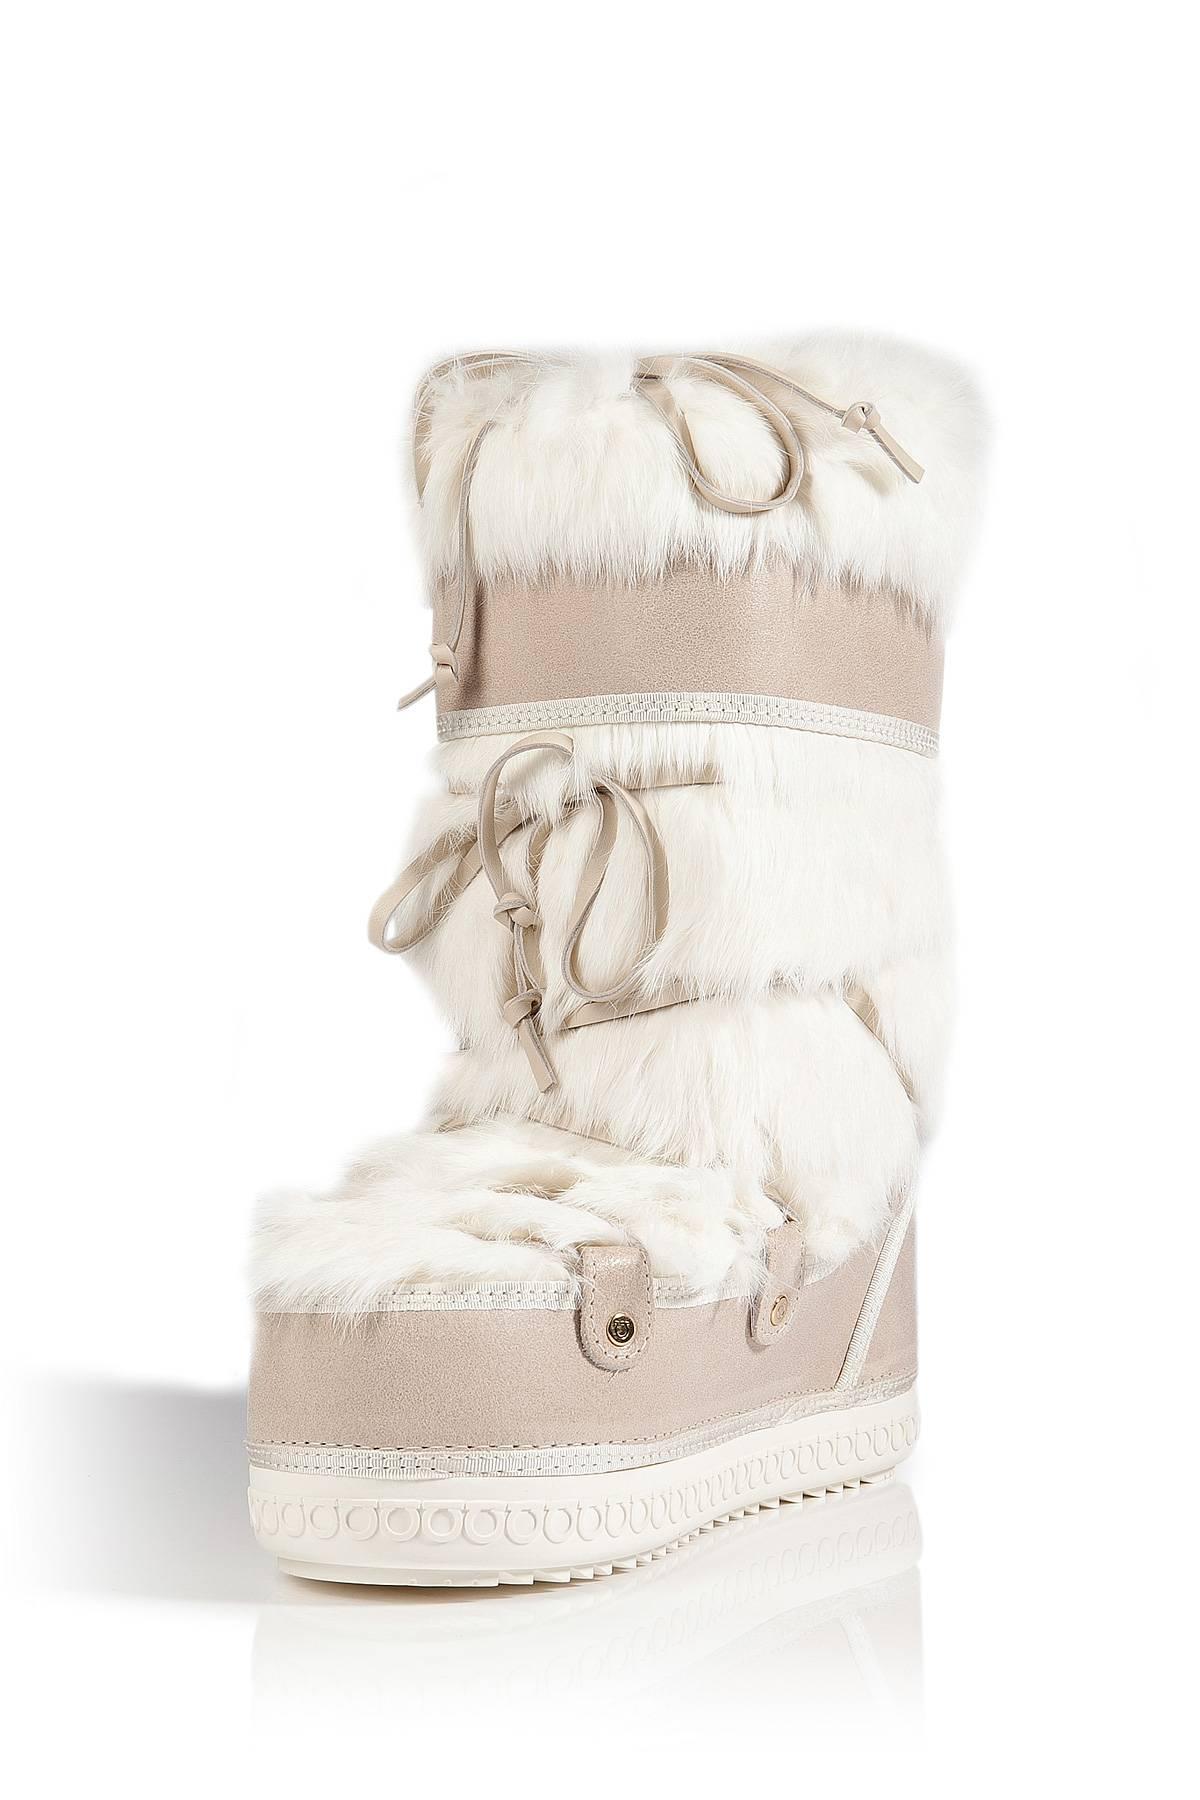 GORGEOUS

SALVATORE FERRAGAMO

FUR SNOW WINTER BOOTS

PERFECT FOR THE WINTER SEASON

DETAILS:

    A FERRAGAMO signature piece that will last you for years
    Made out of finest suede leather and softest rabbit fur - a perfect combination!
    Lace